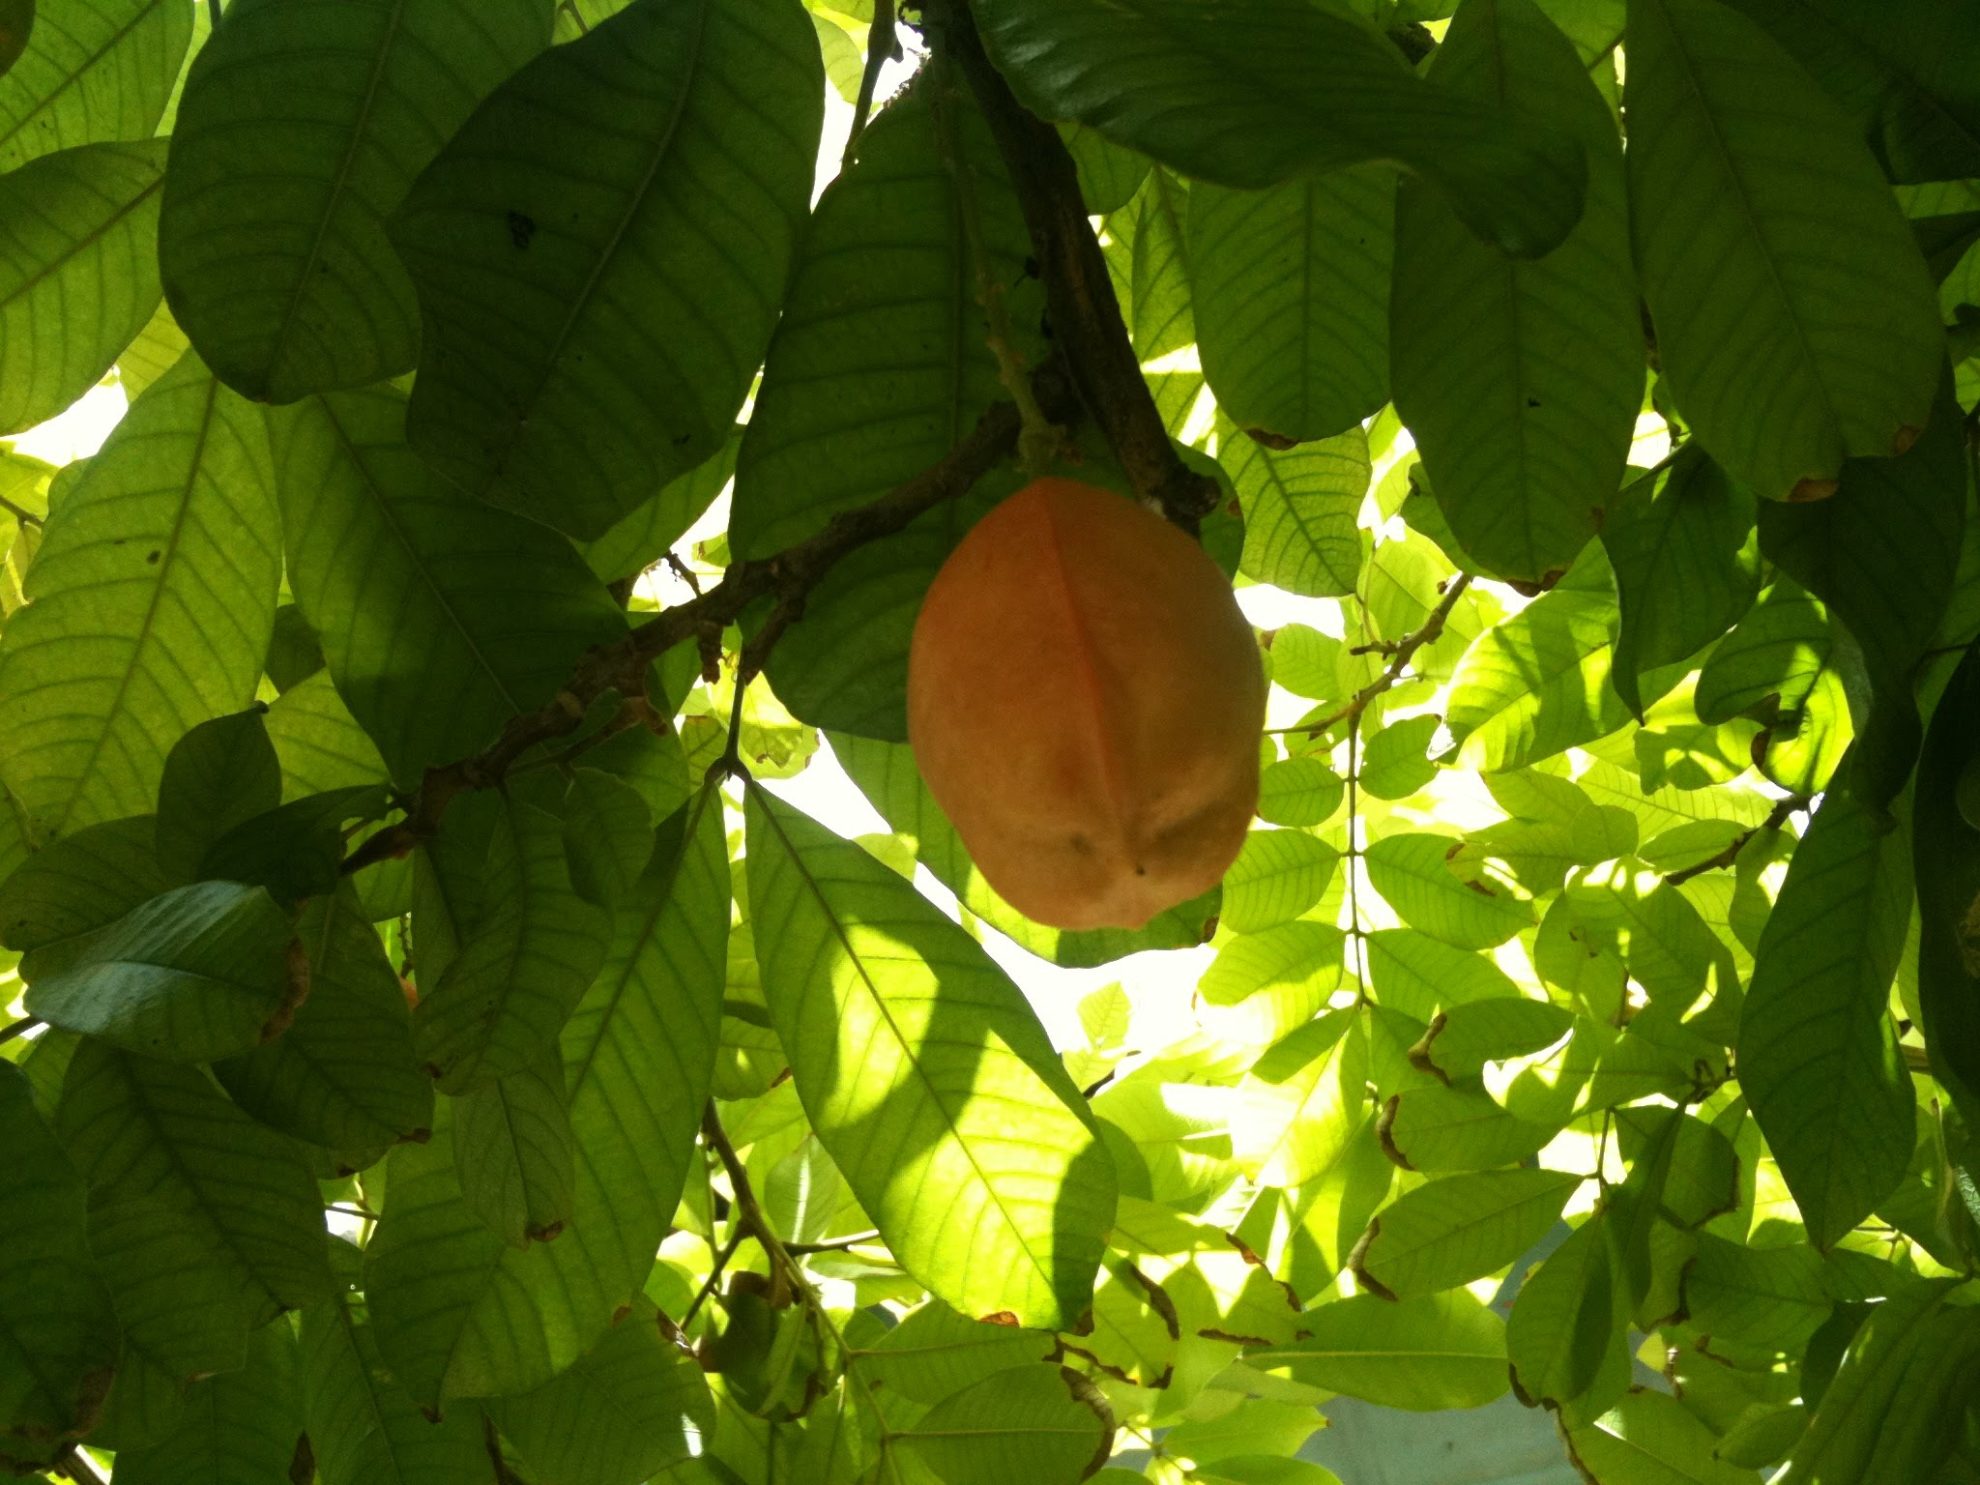 An orange grows ripe on the underside of a brilliant green canopy